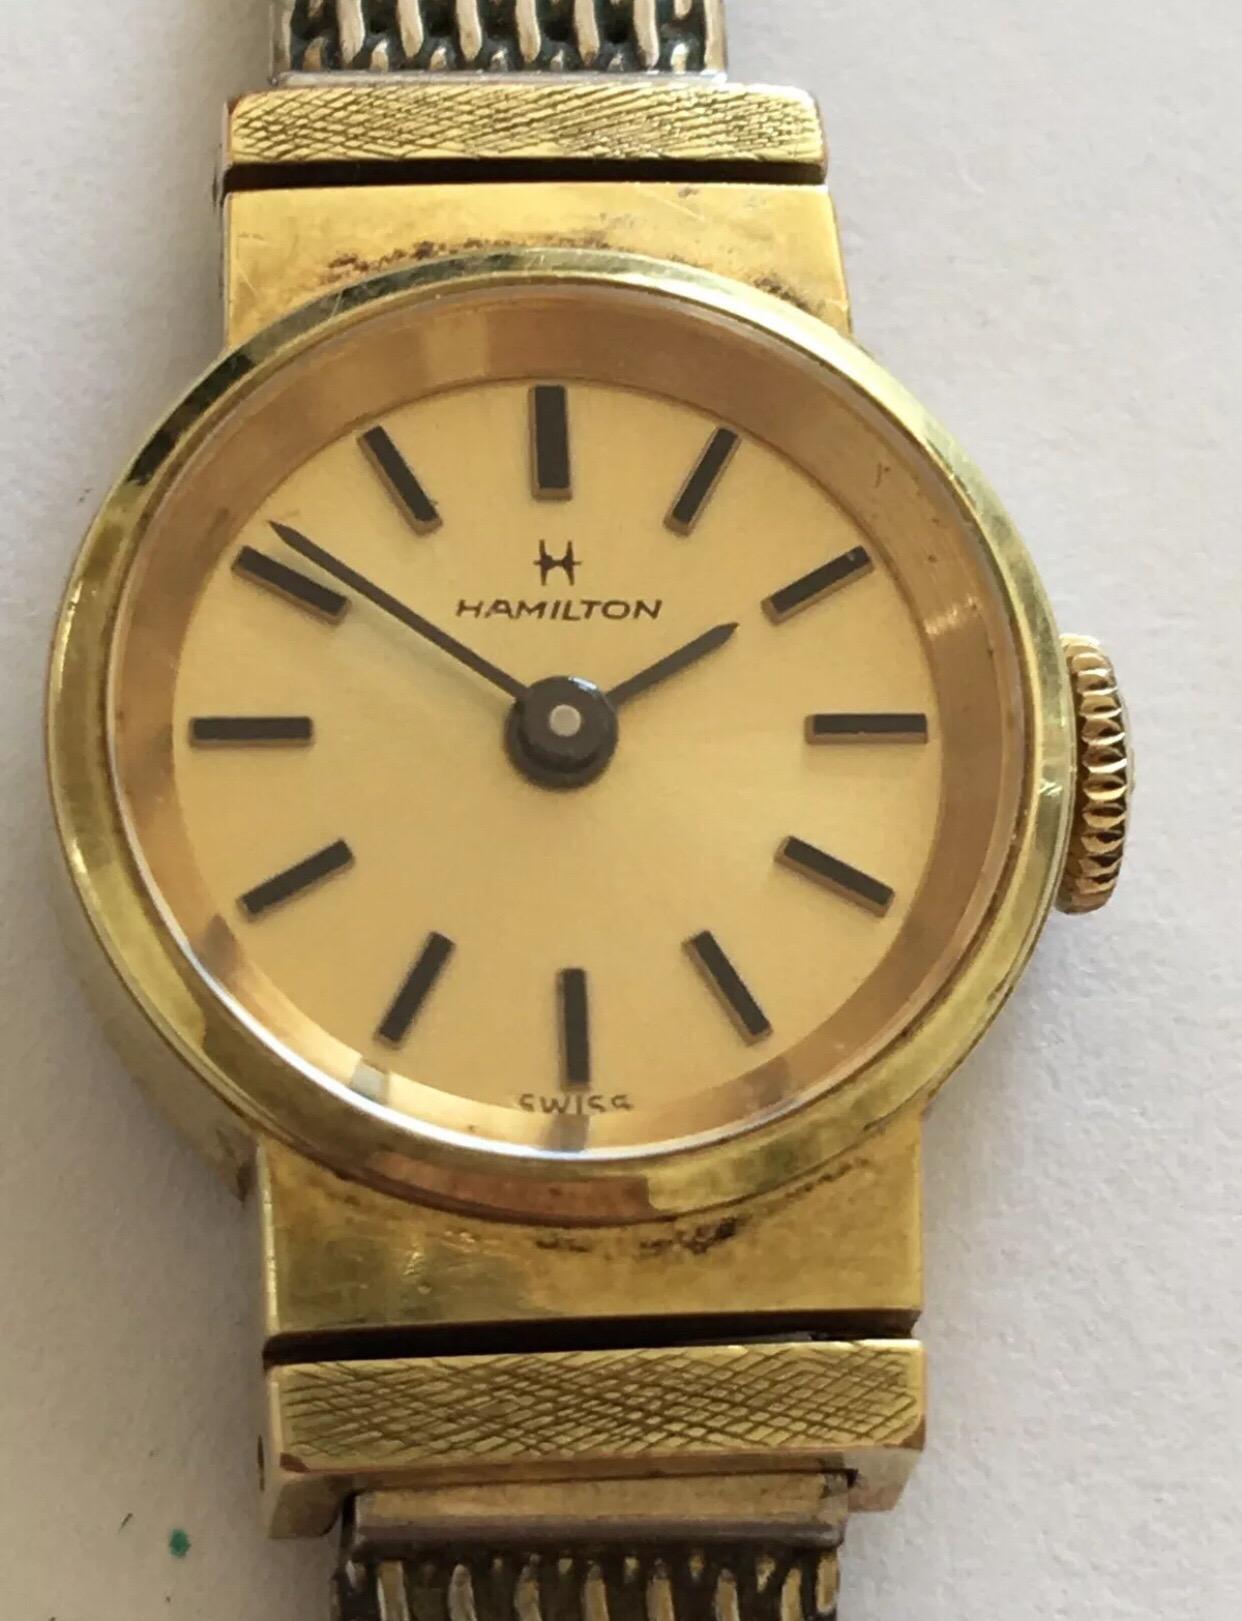 Vintage gold plated Hamilton Ladies Wristwatch.


This tiny beautiful mechanical watch is working and ticks well. Has some wear on the gold plated metal strap.